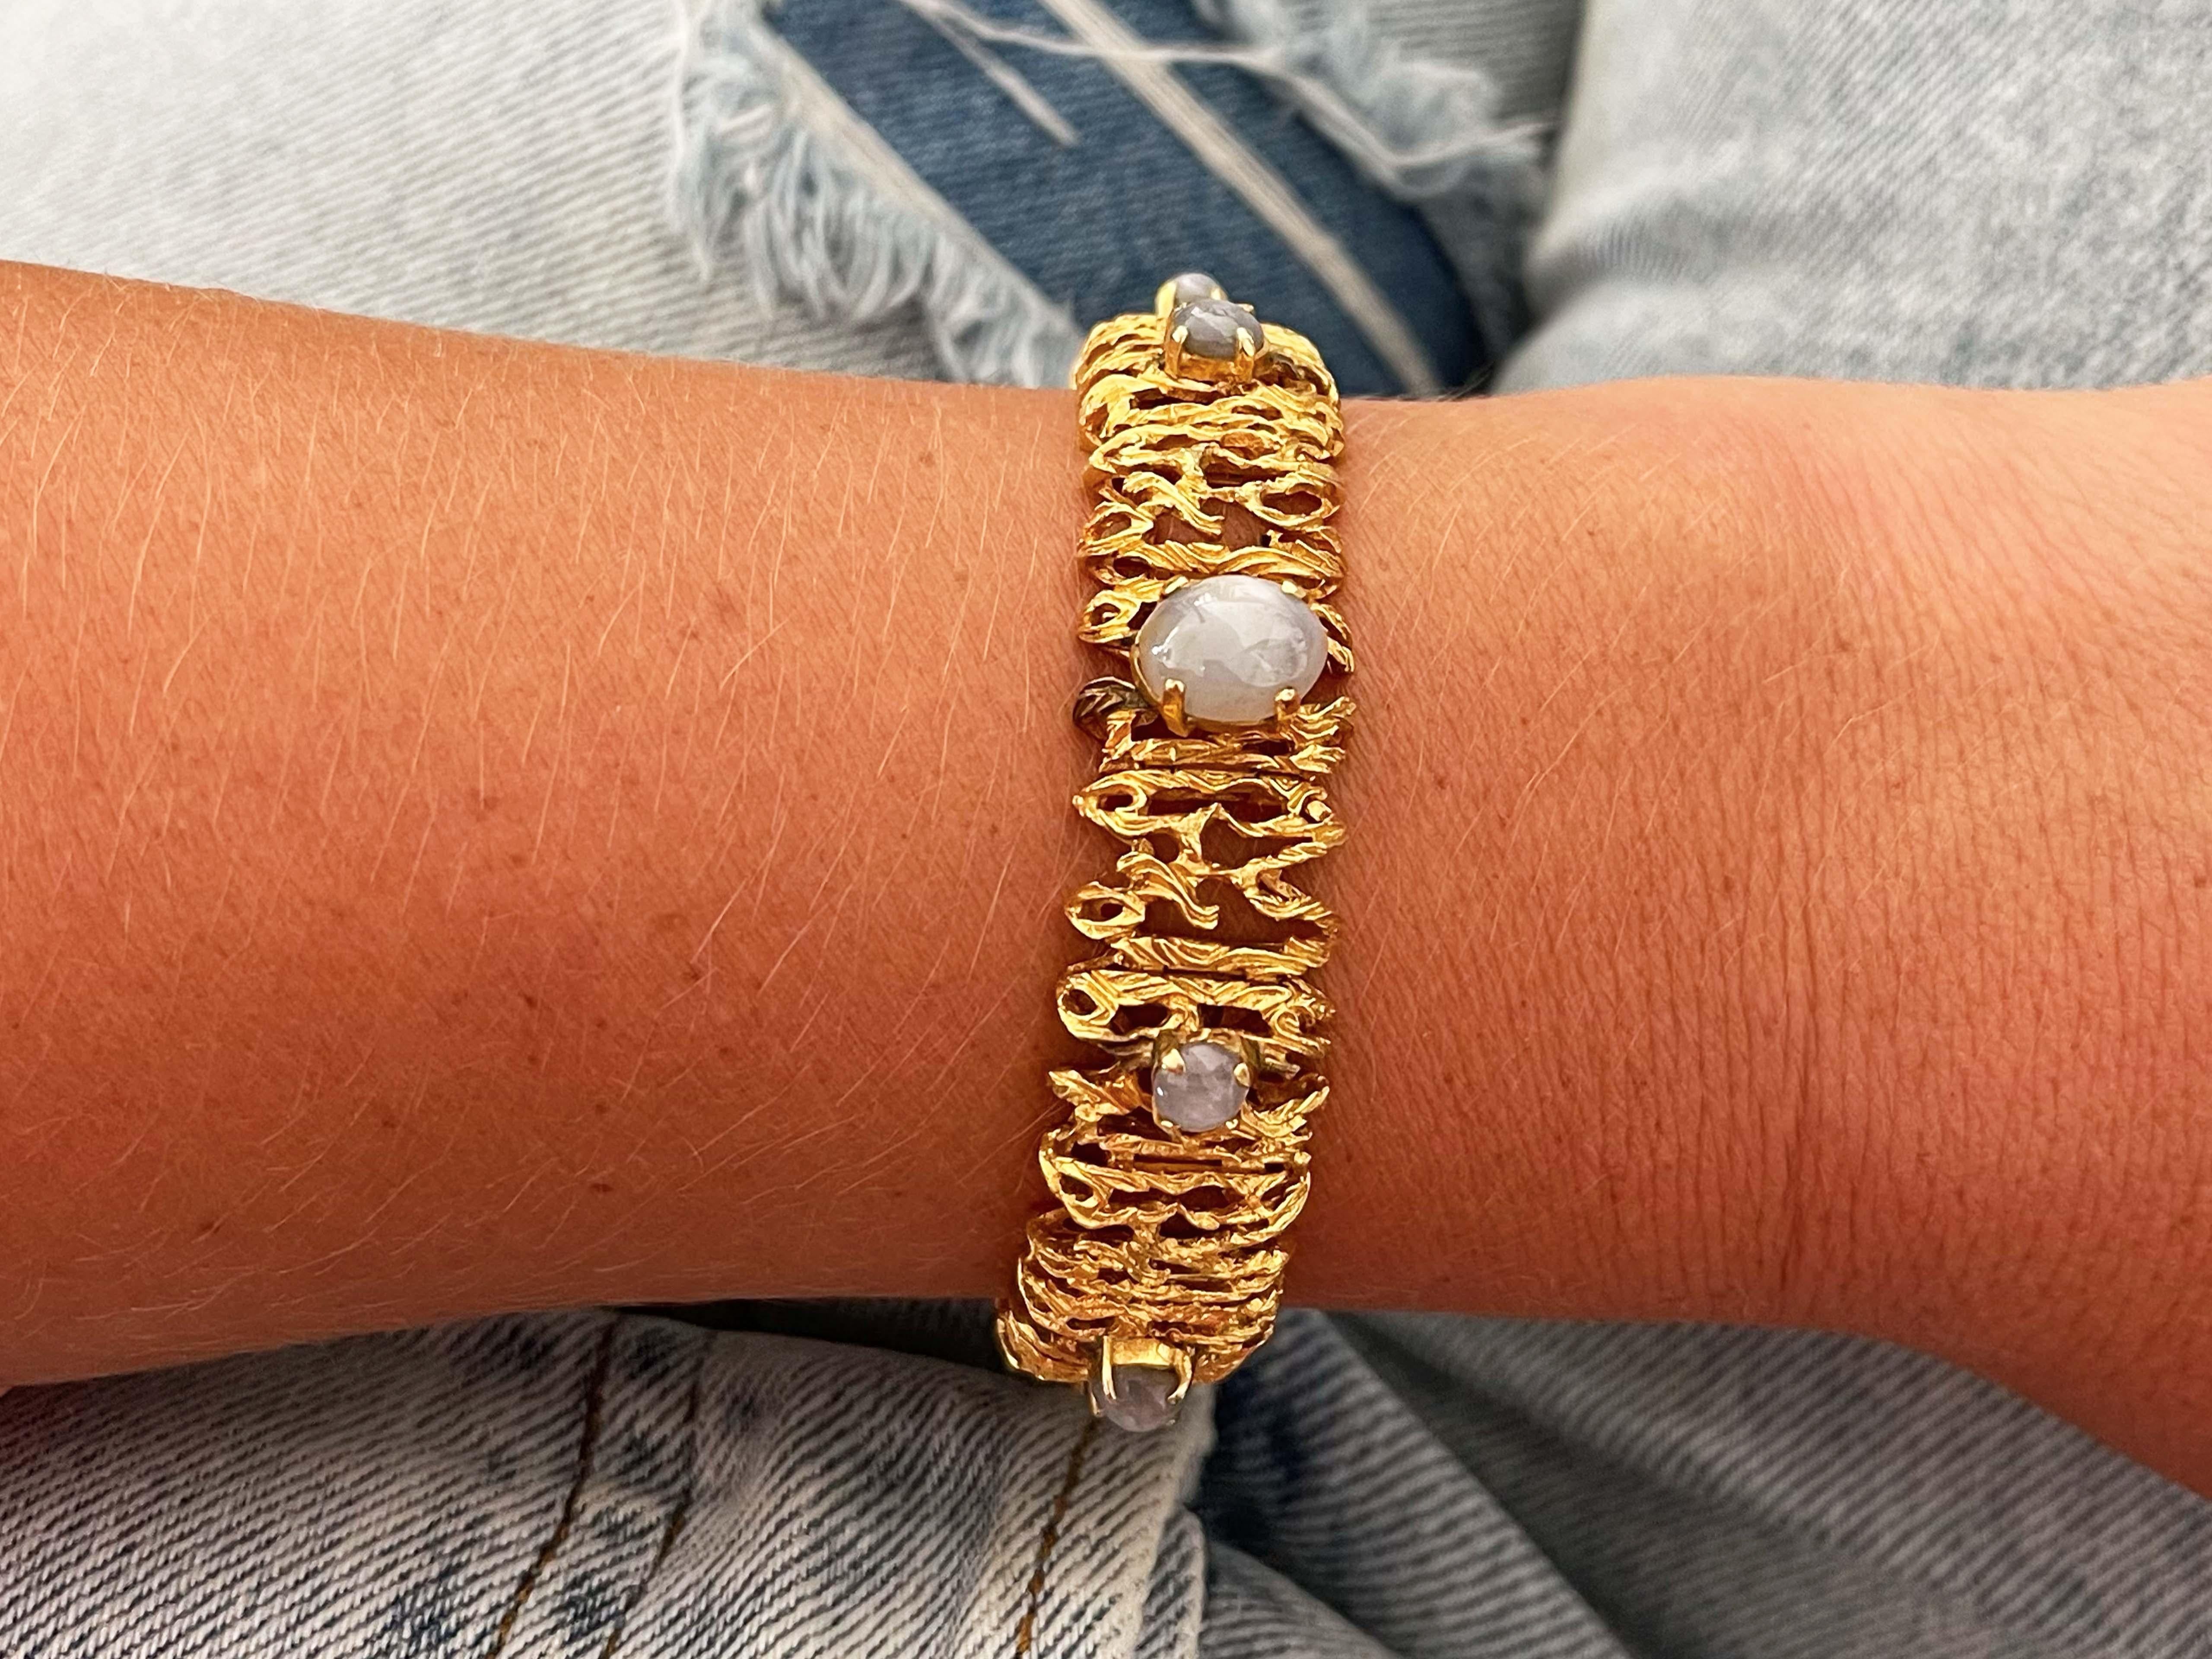 Bracelet Specifications:

Metal: 18k Yellow Gold

Gemstones: Star Sapphires 

Sapphire Carat Weight: ~10 carats

Star Sapphire Count: 8

Bracelet Length: ~6.8 inches

Bracelet Width: ~ 15.7 mm

Total Weight: 41.4 Grams

Condition: Vintage,